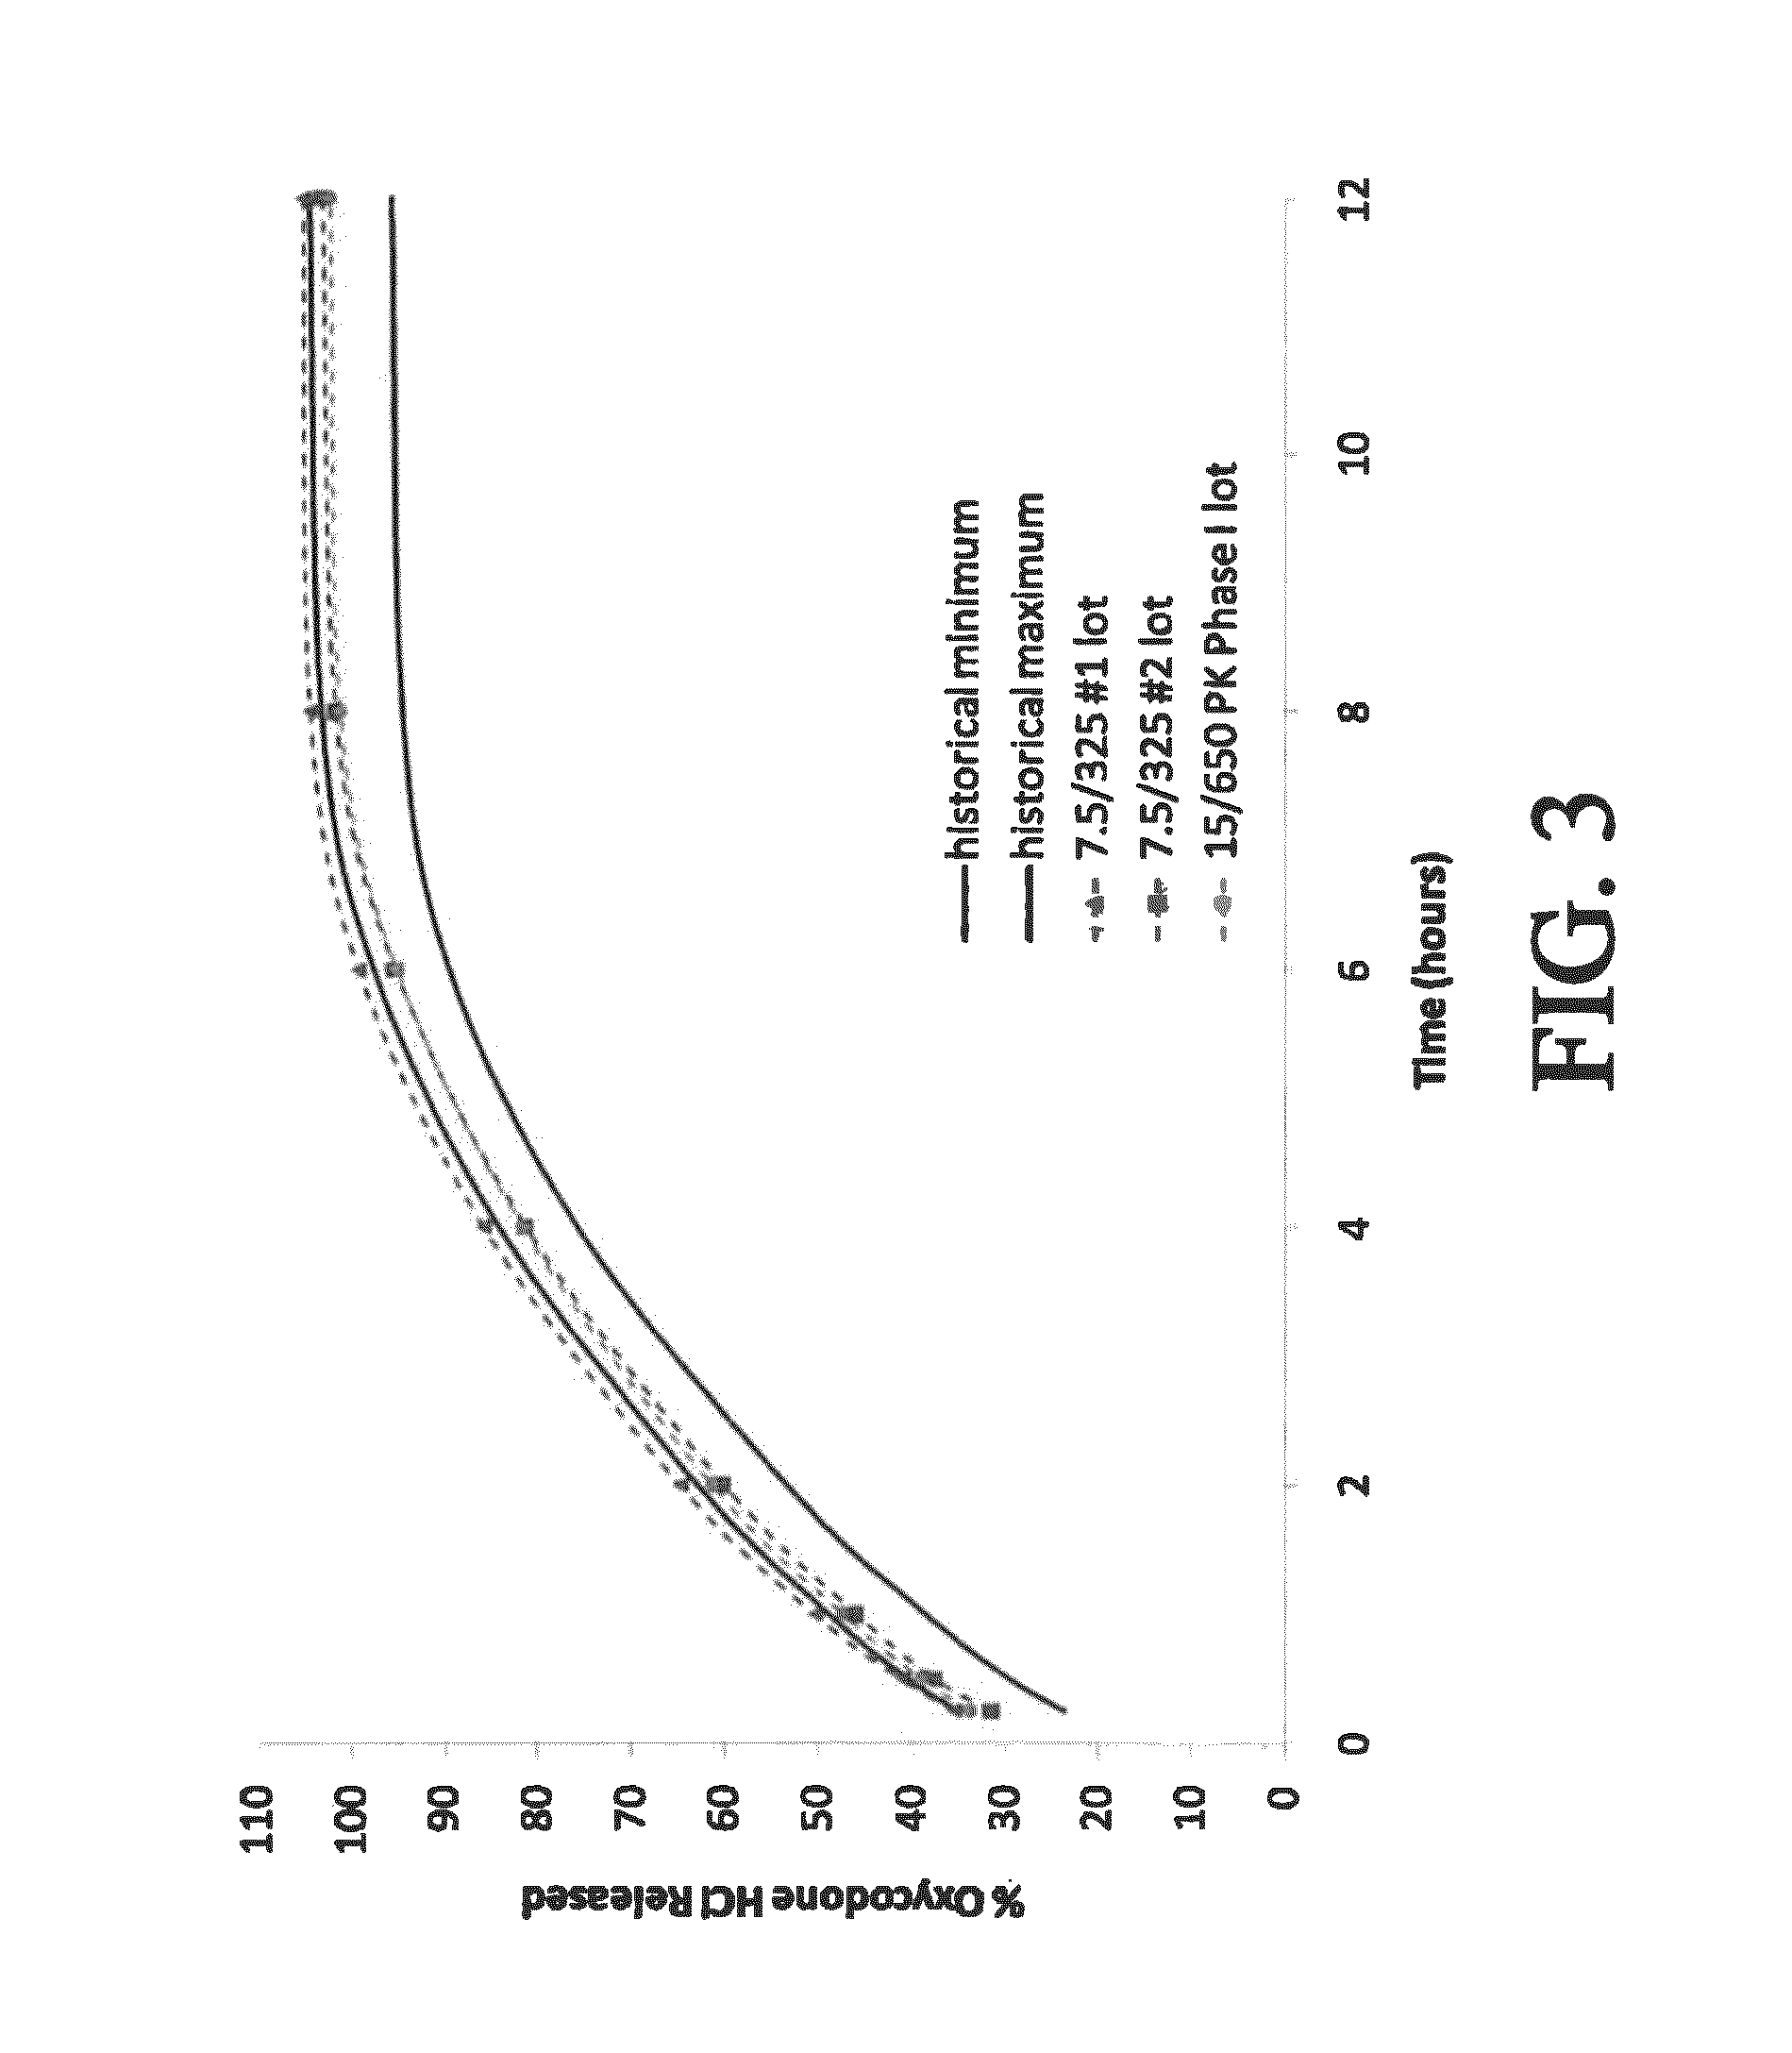 Combination composition comprising oxycodone and acetaminophen for rapid onset and extended duration of analgesia